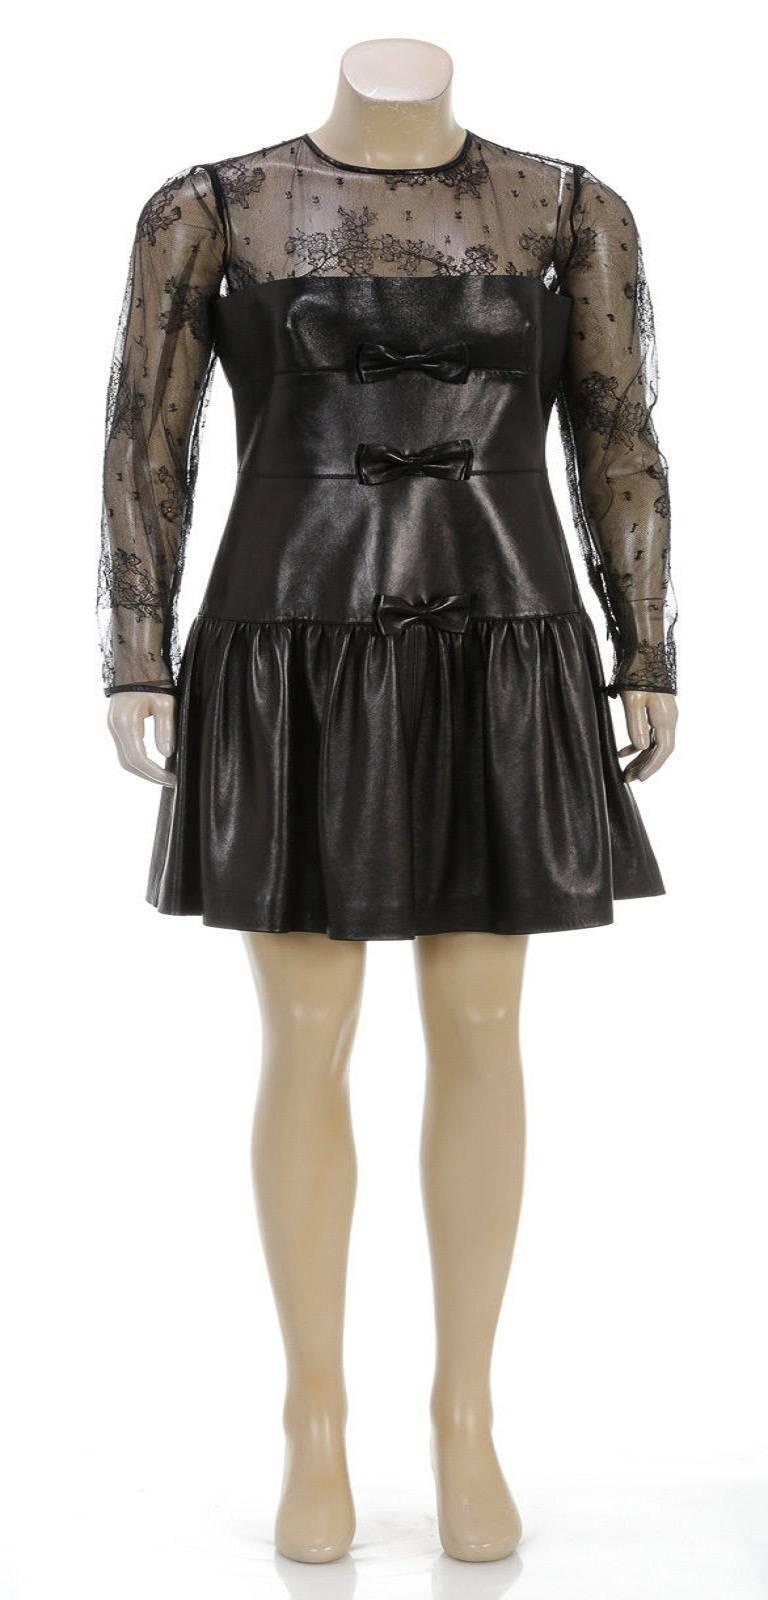 Designer: Valentino
Type: 
Dress
Condition: 
Pre-owned in very good condition - minor wear
Color: 
Black
Material: 
100% Lambskin
Dimensions: 
Bust: 34